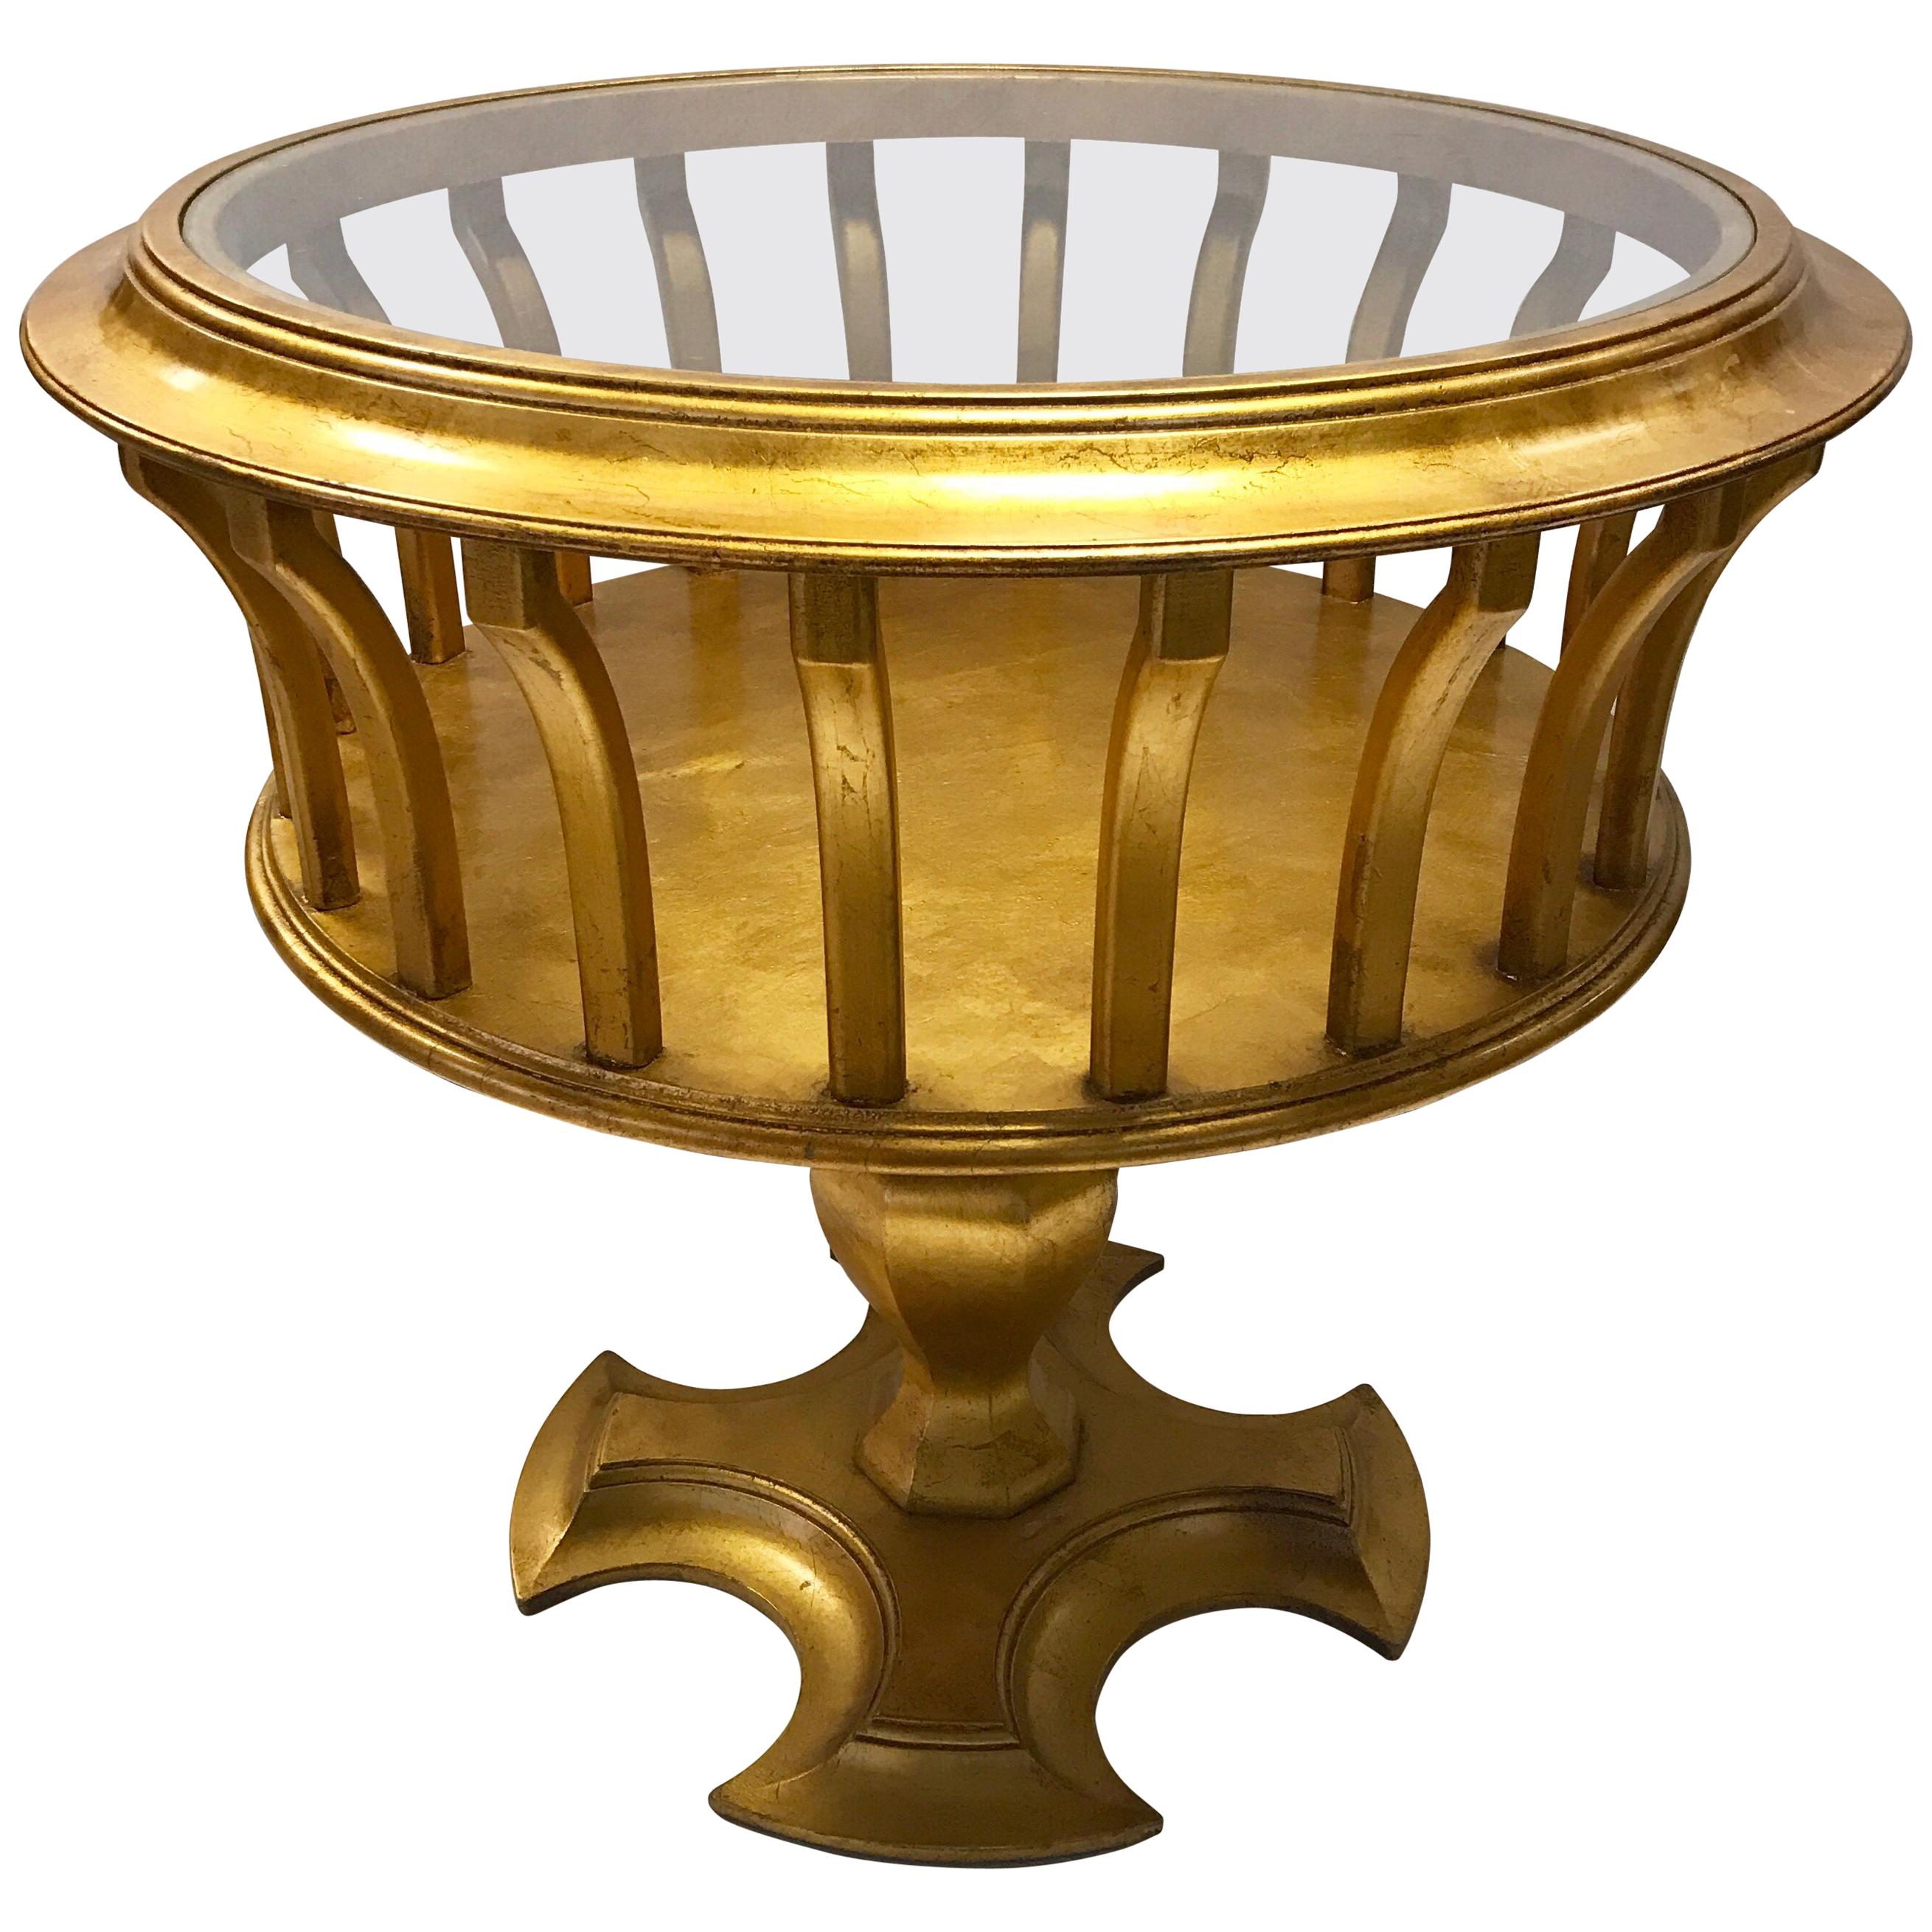 Italian Giltwood and Glass Round Slatted Table Made in Italy